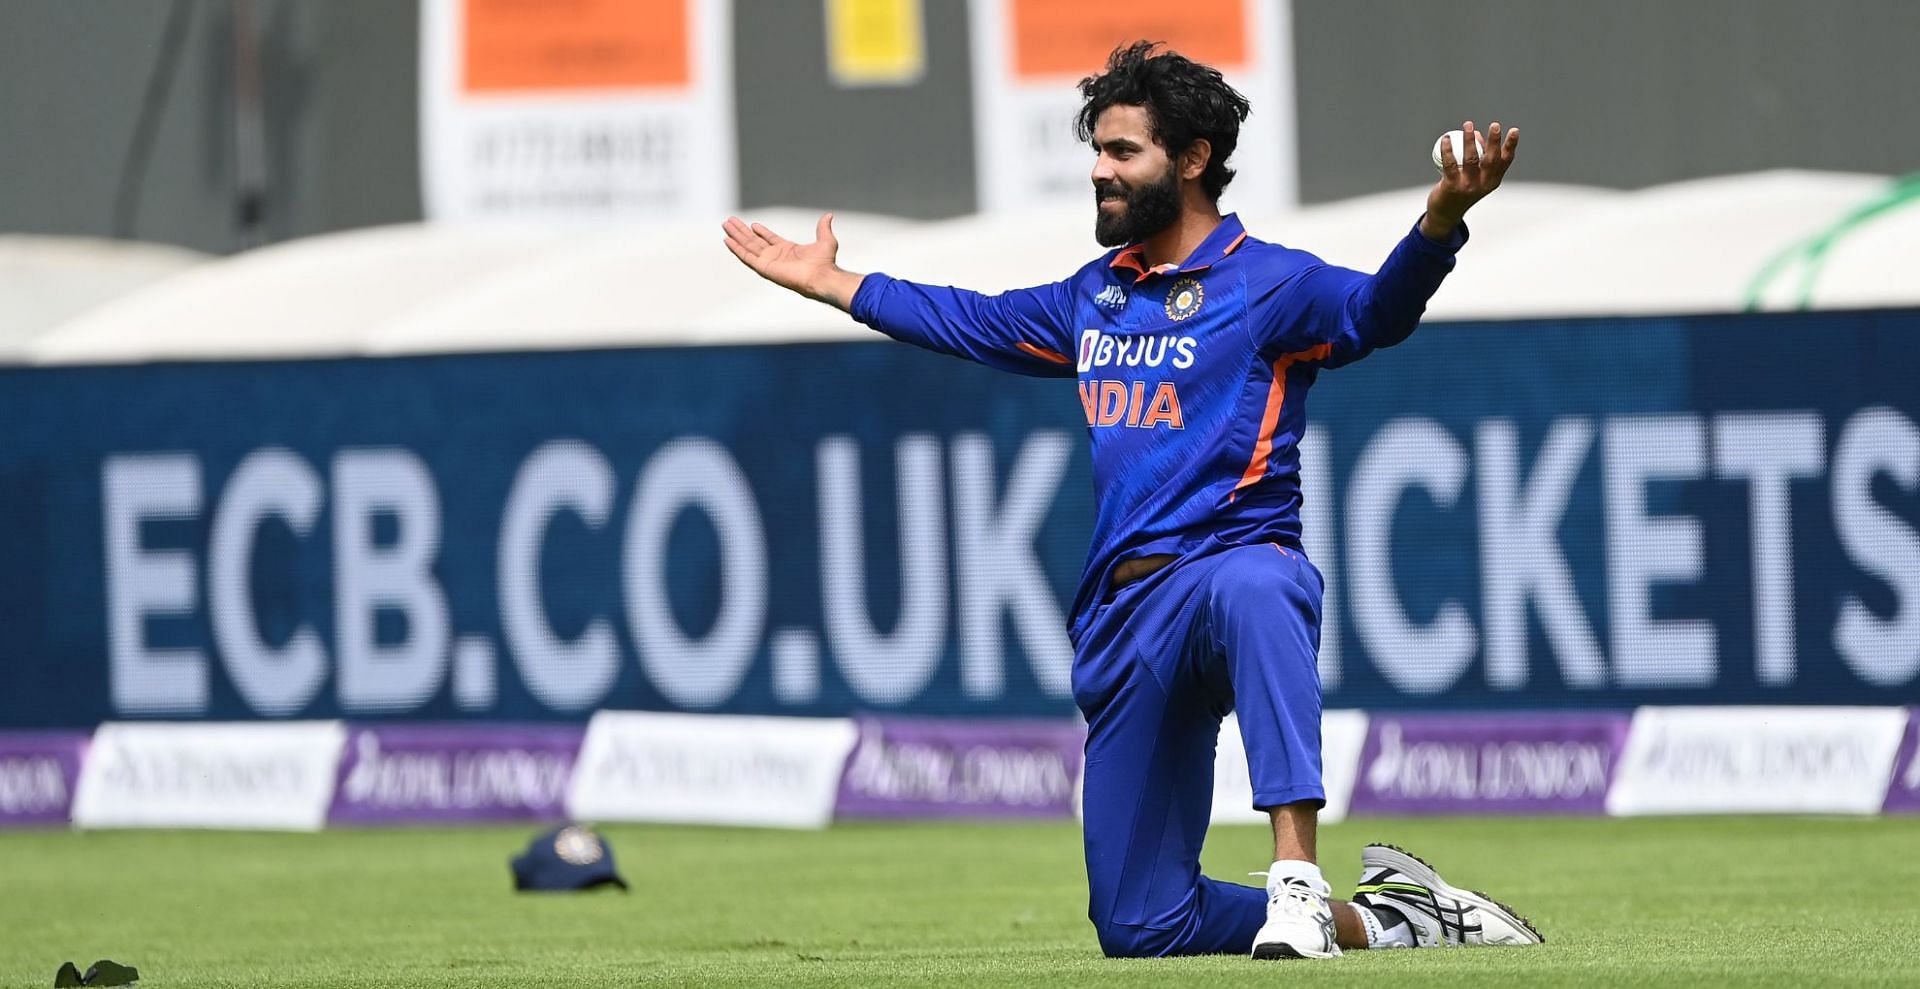 Ravindra Jadeja was absolute electric on the field in Manchester. (Credit: Twitter)